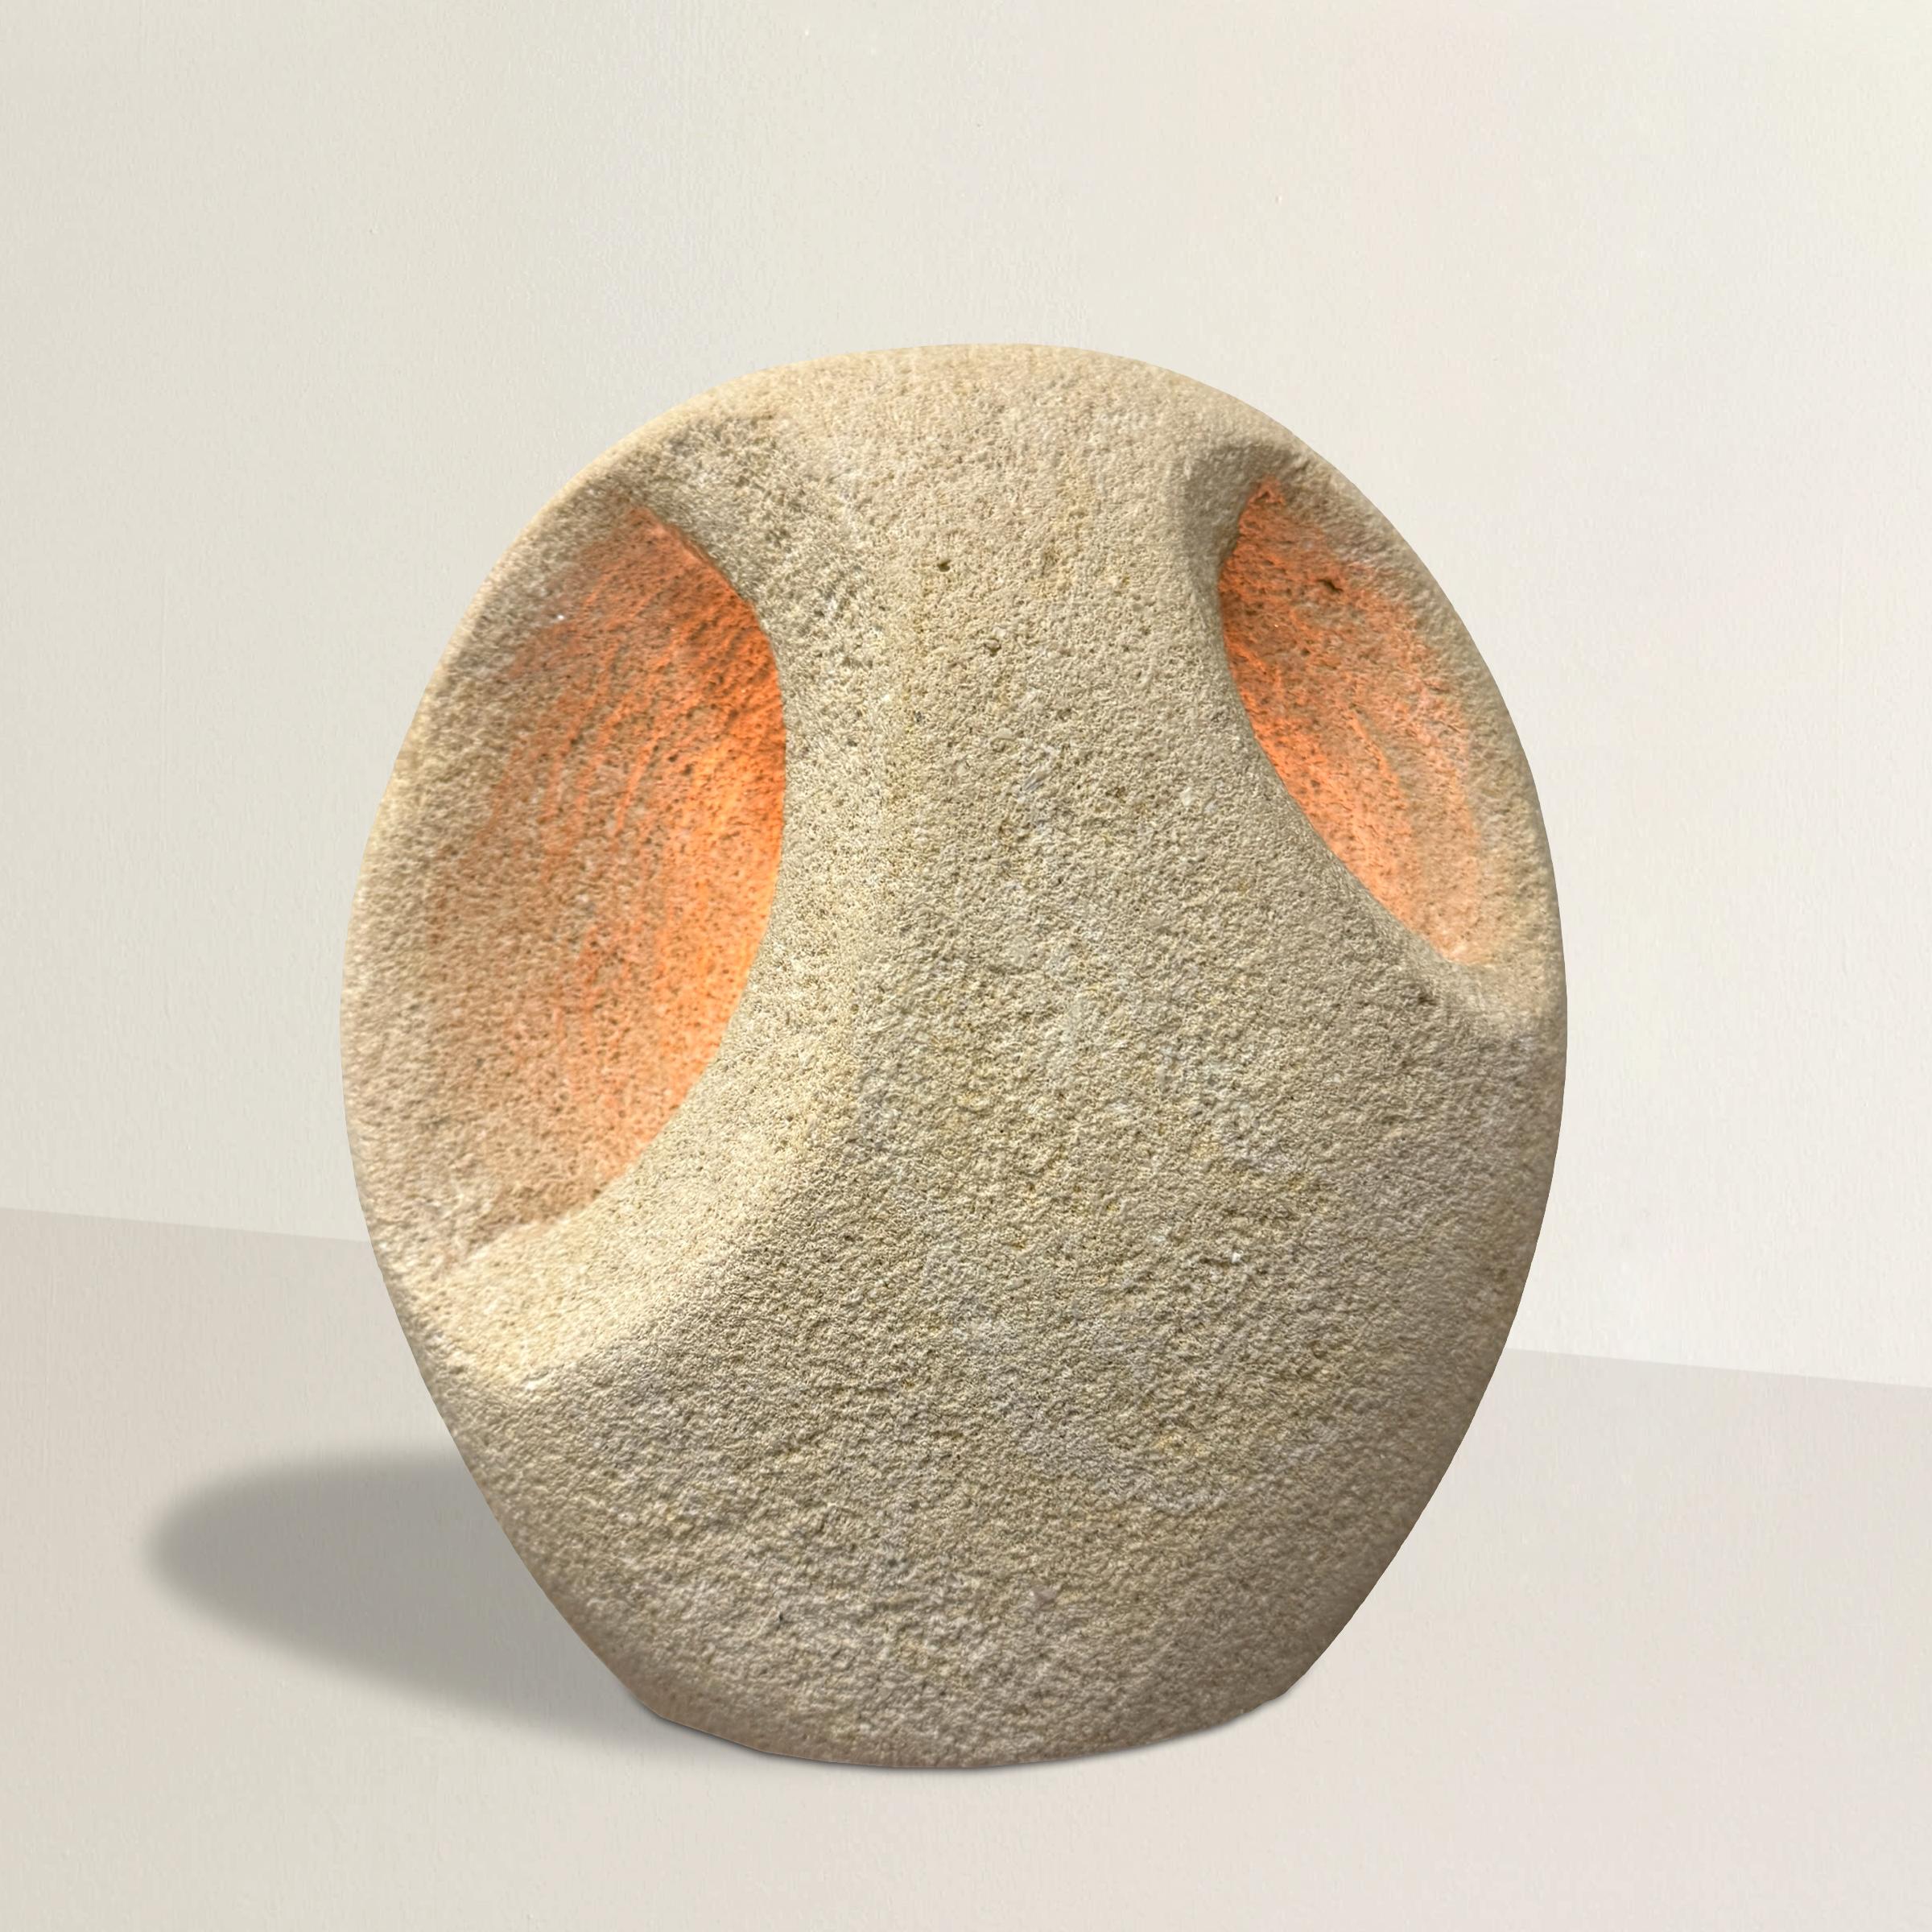 This late 20th-century French Modernist-inspired carved limestone table lamp is a stunning blend of form and function. Its ovoid shape is complemented by two oval voids carved into the front, allowing the soft glow of a single light bulb to emanate